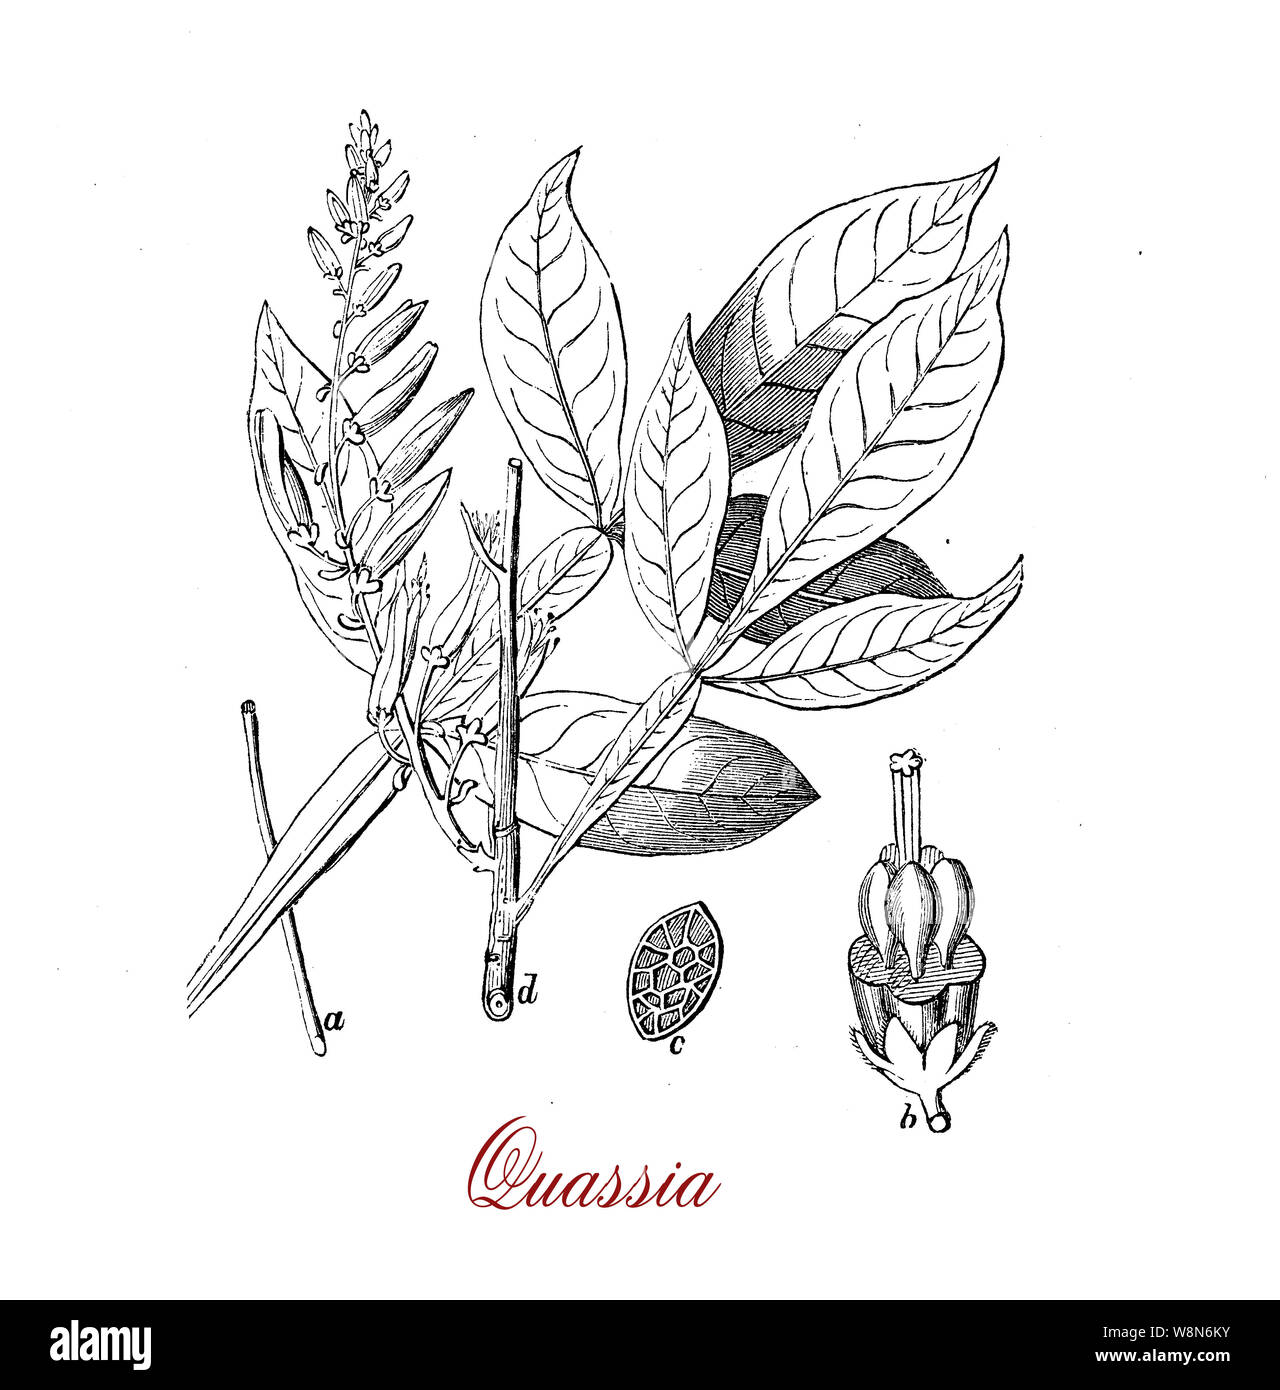 Vintage illustration of quassia, shrub with bright red flowers used as insecticide, in traditional medicine and as additive in the food industry for its bitter taste. Stock Photo